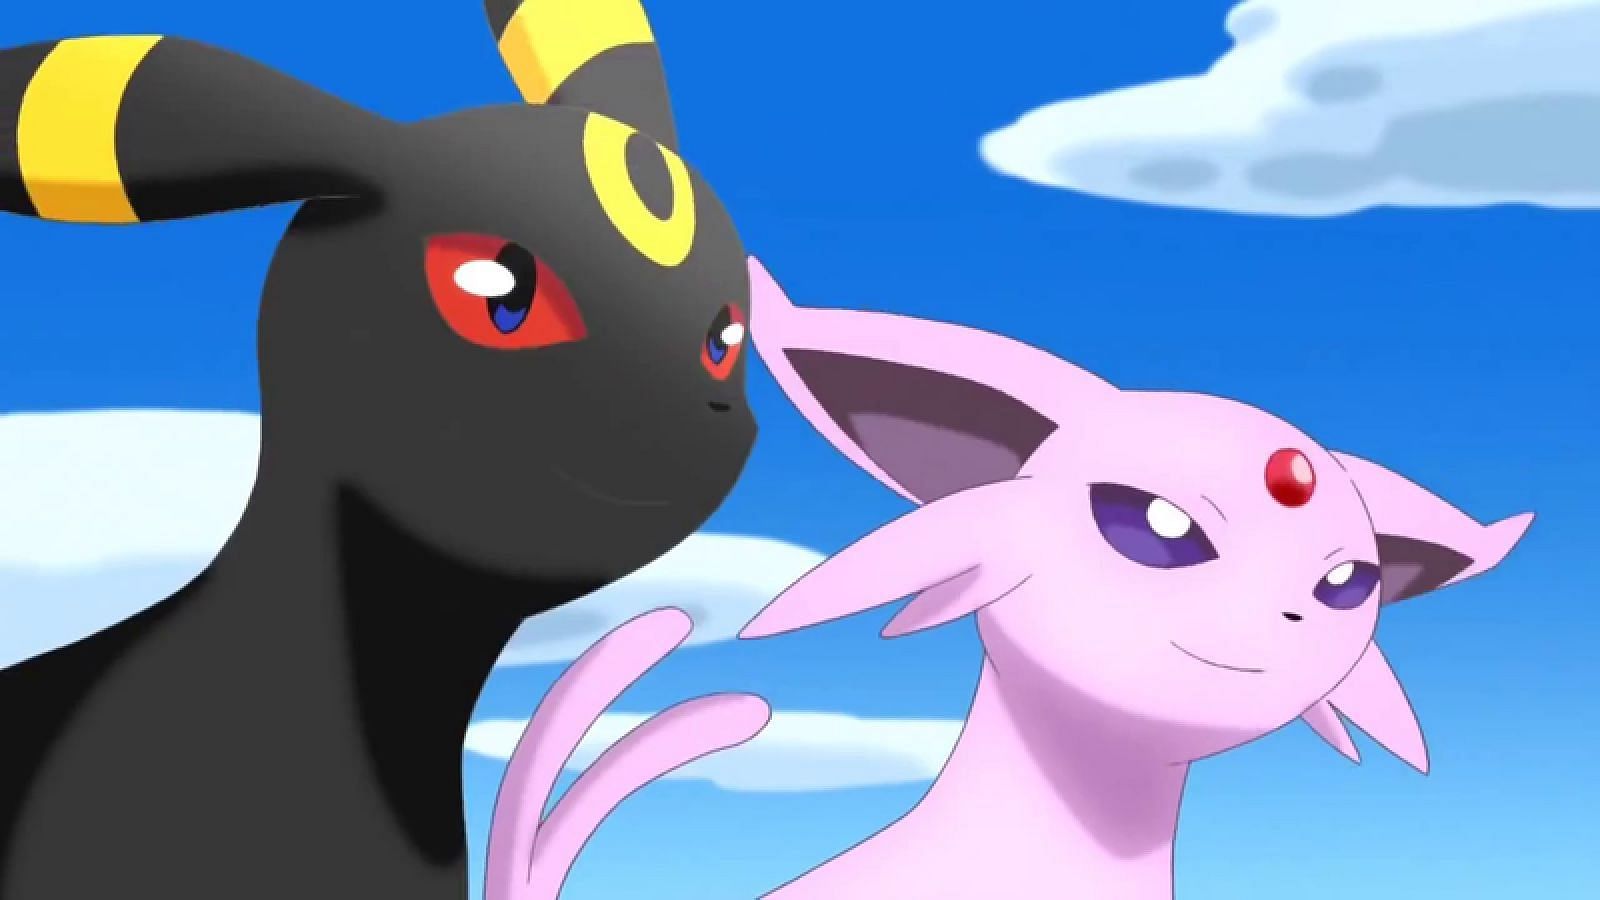 Steps to get Umbreon and Espeon in Pokemon GO (Image via Niantic)